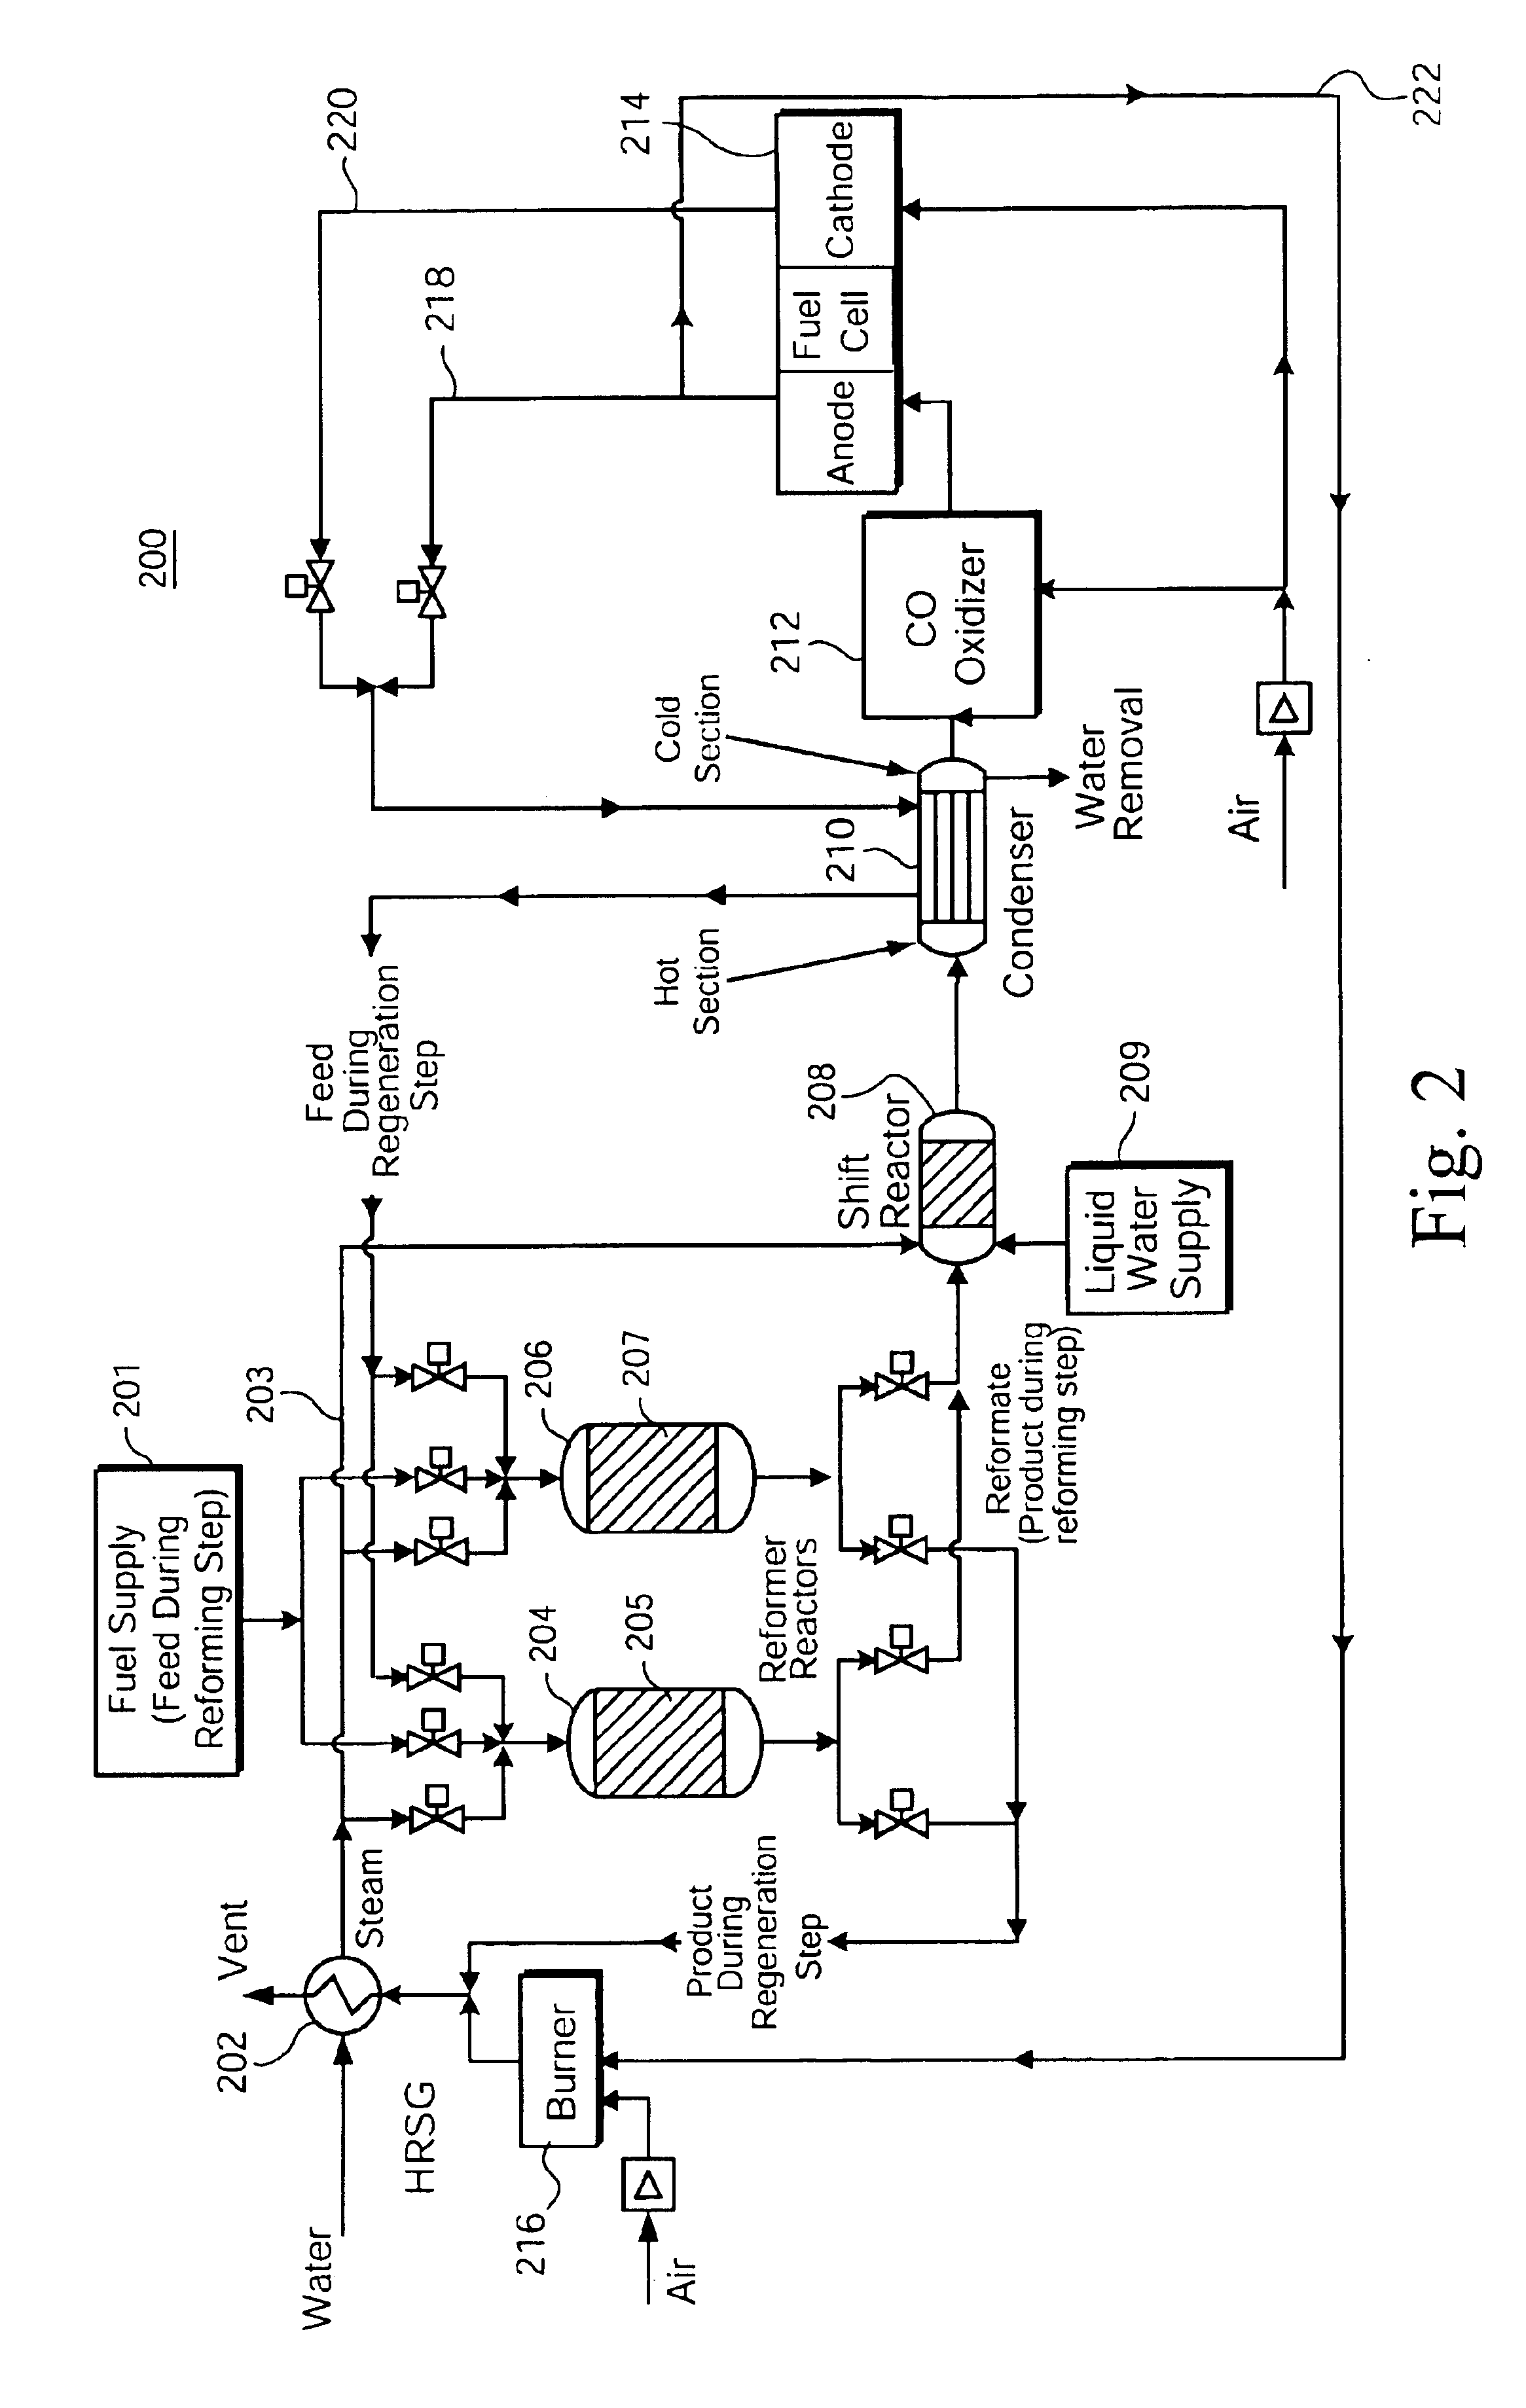 Fuel processor apparatus and method based on autothermal cyclic reforming